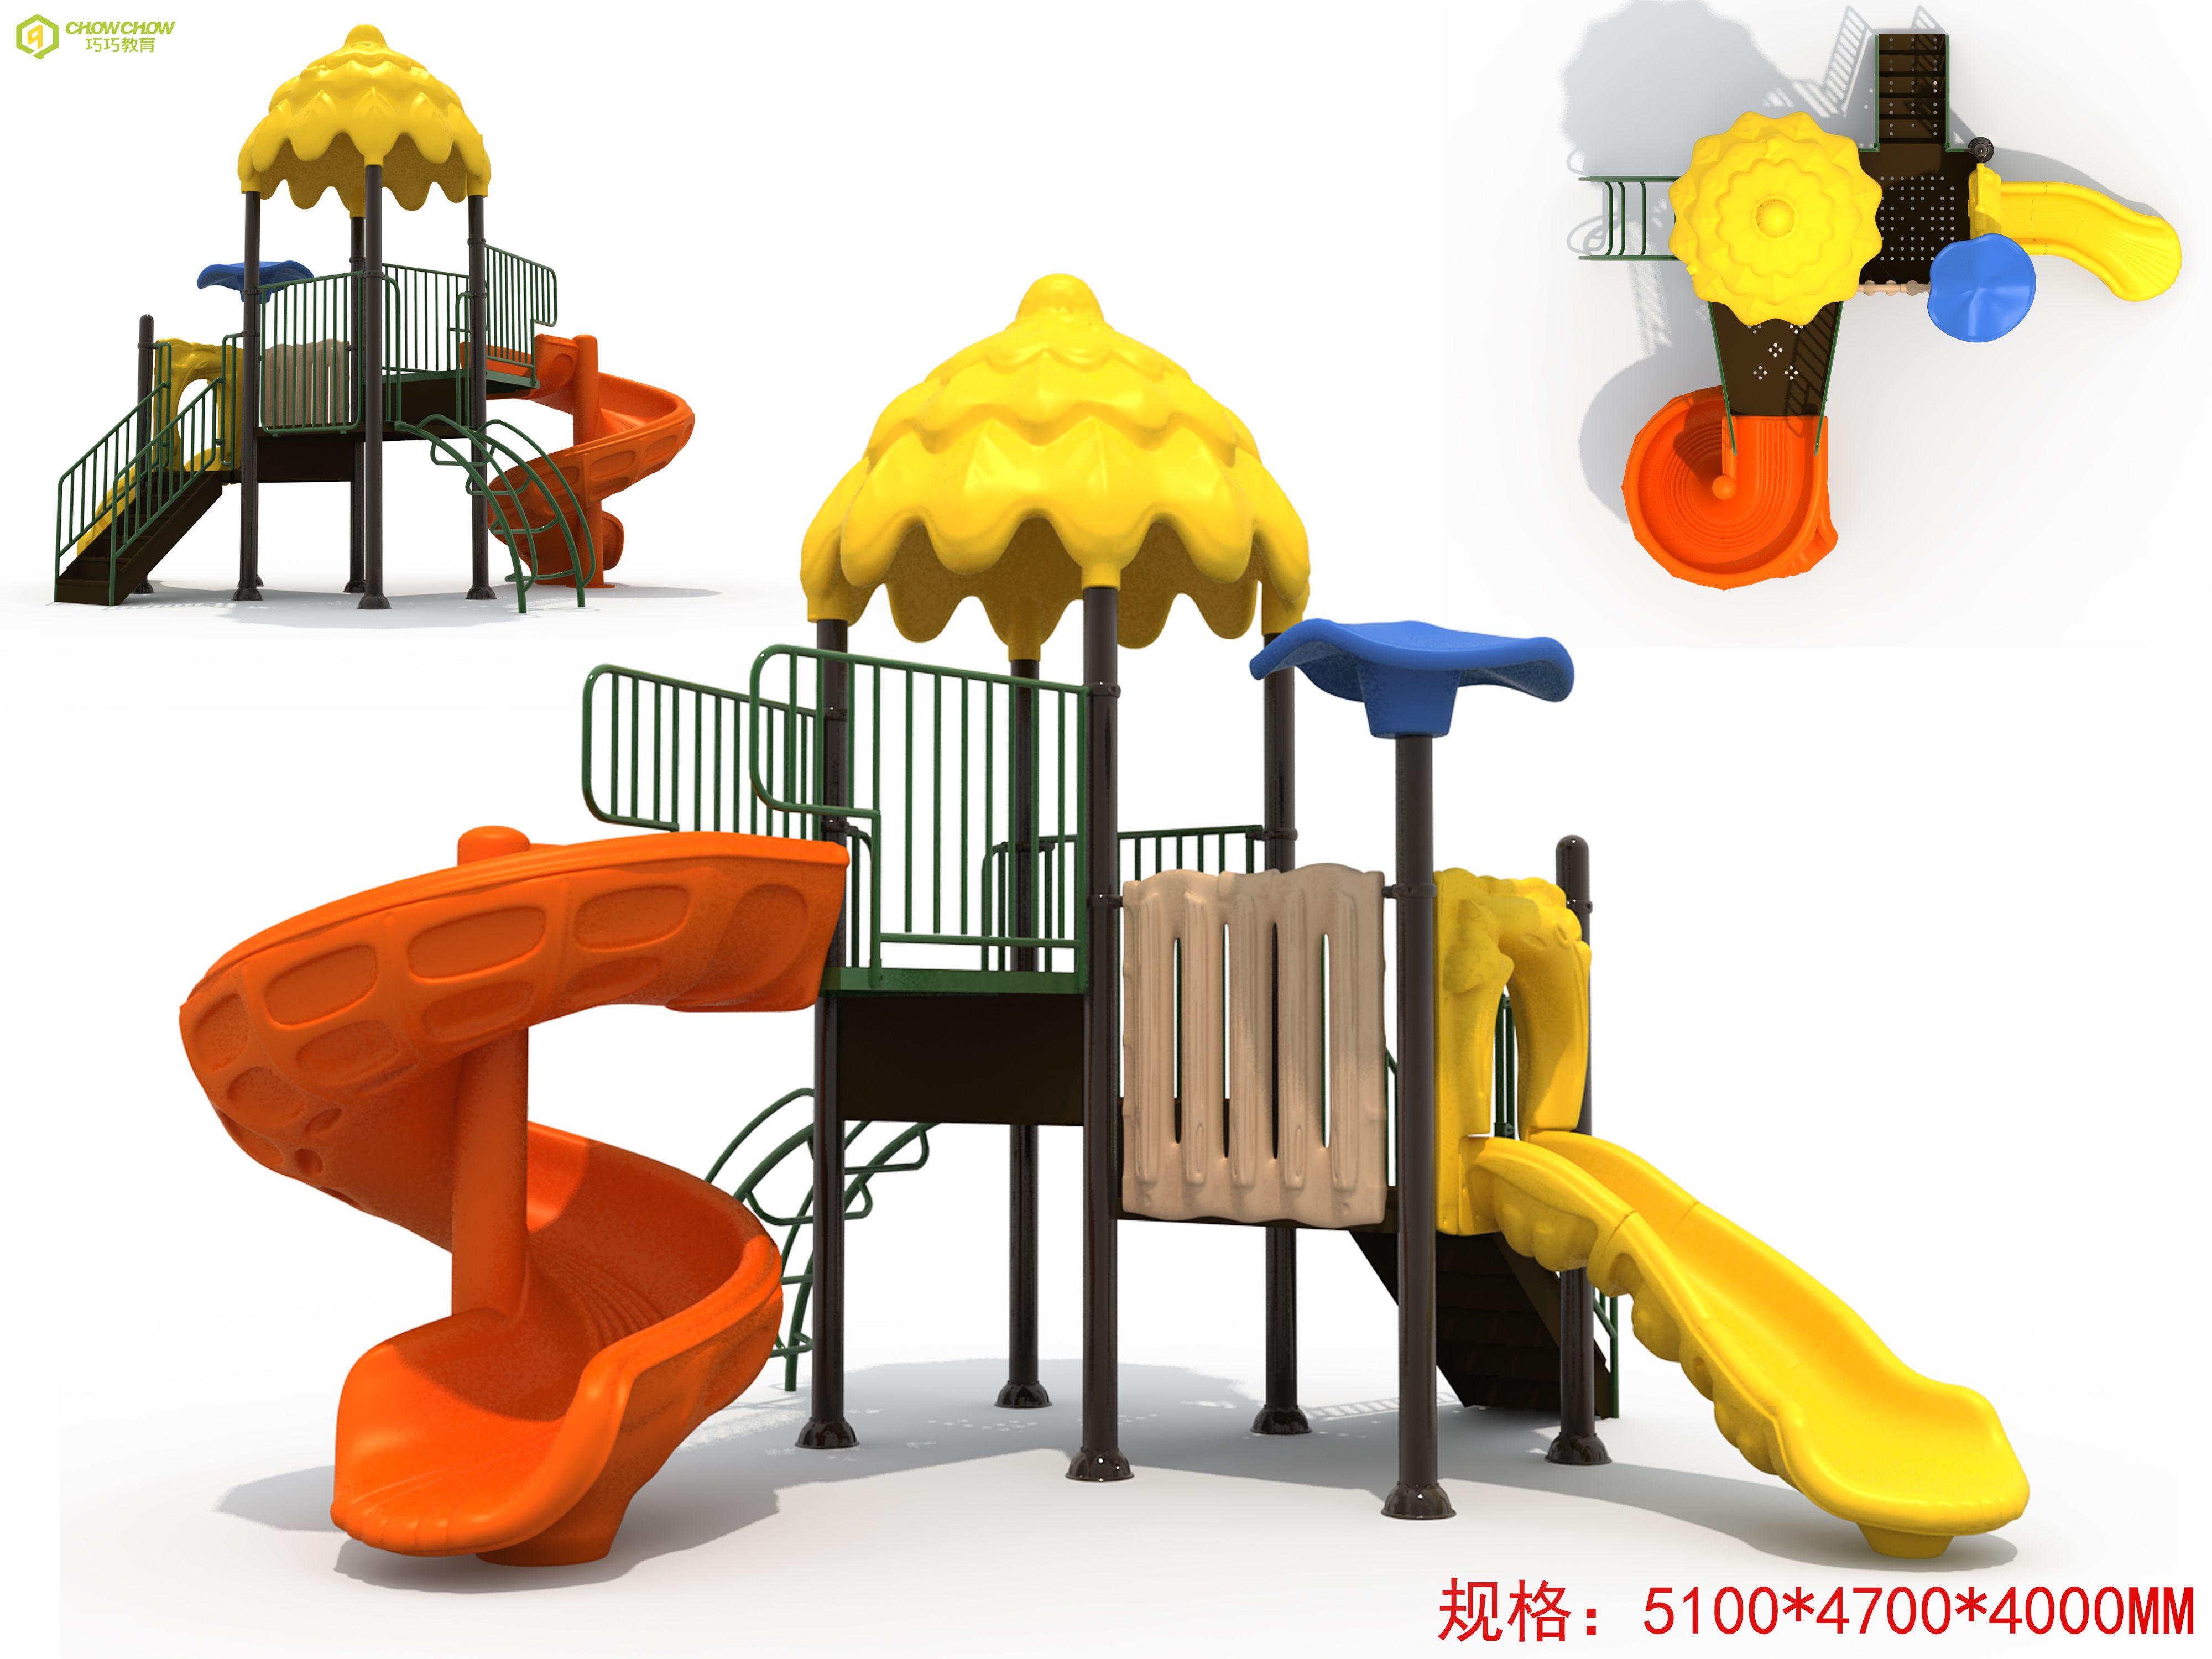 Commercial Party Rental Equipment Playground Kids Neutral Outdoor Playground Equipment Plays For Children'S Parties